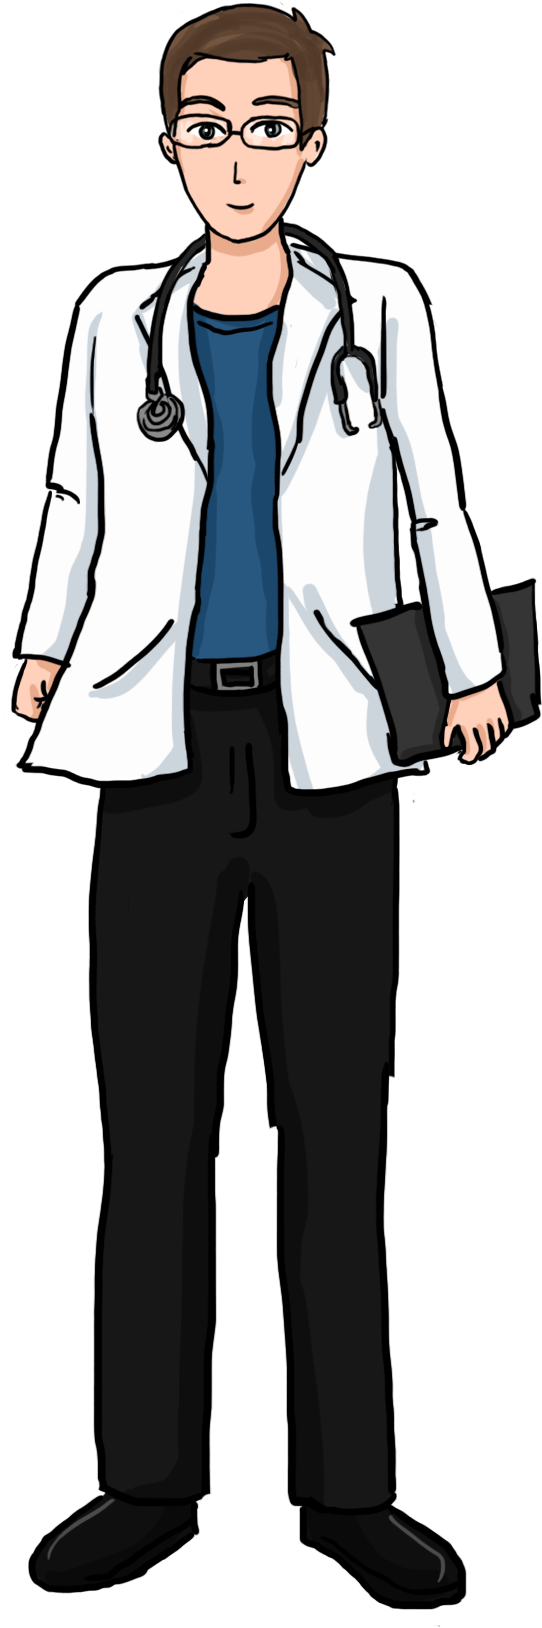 Gallery Of Kisspng Cute Doctor Physician Clip Art Doctors - Male Doctor Clipart Png (669x1684)